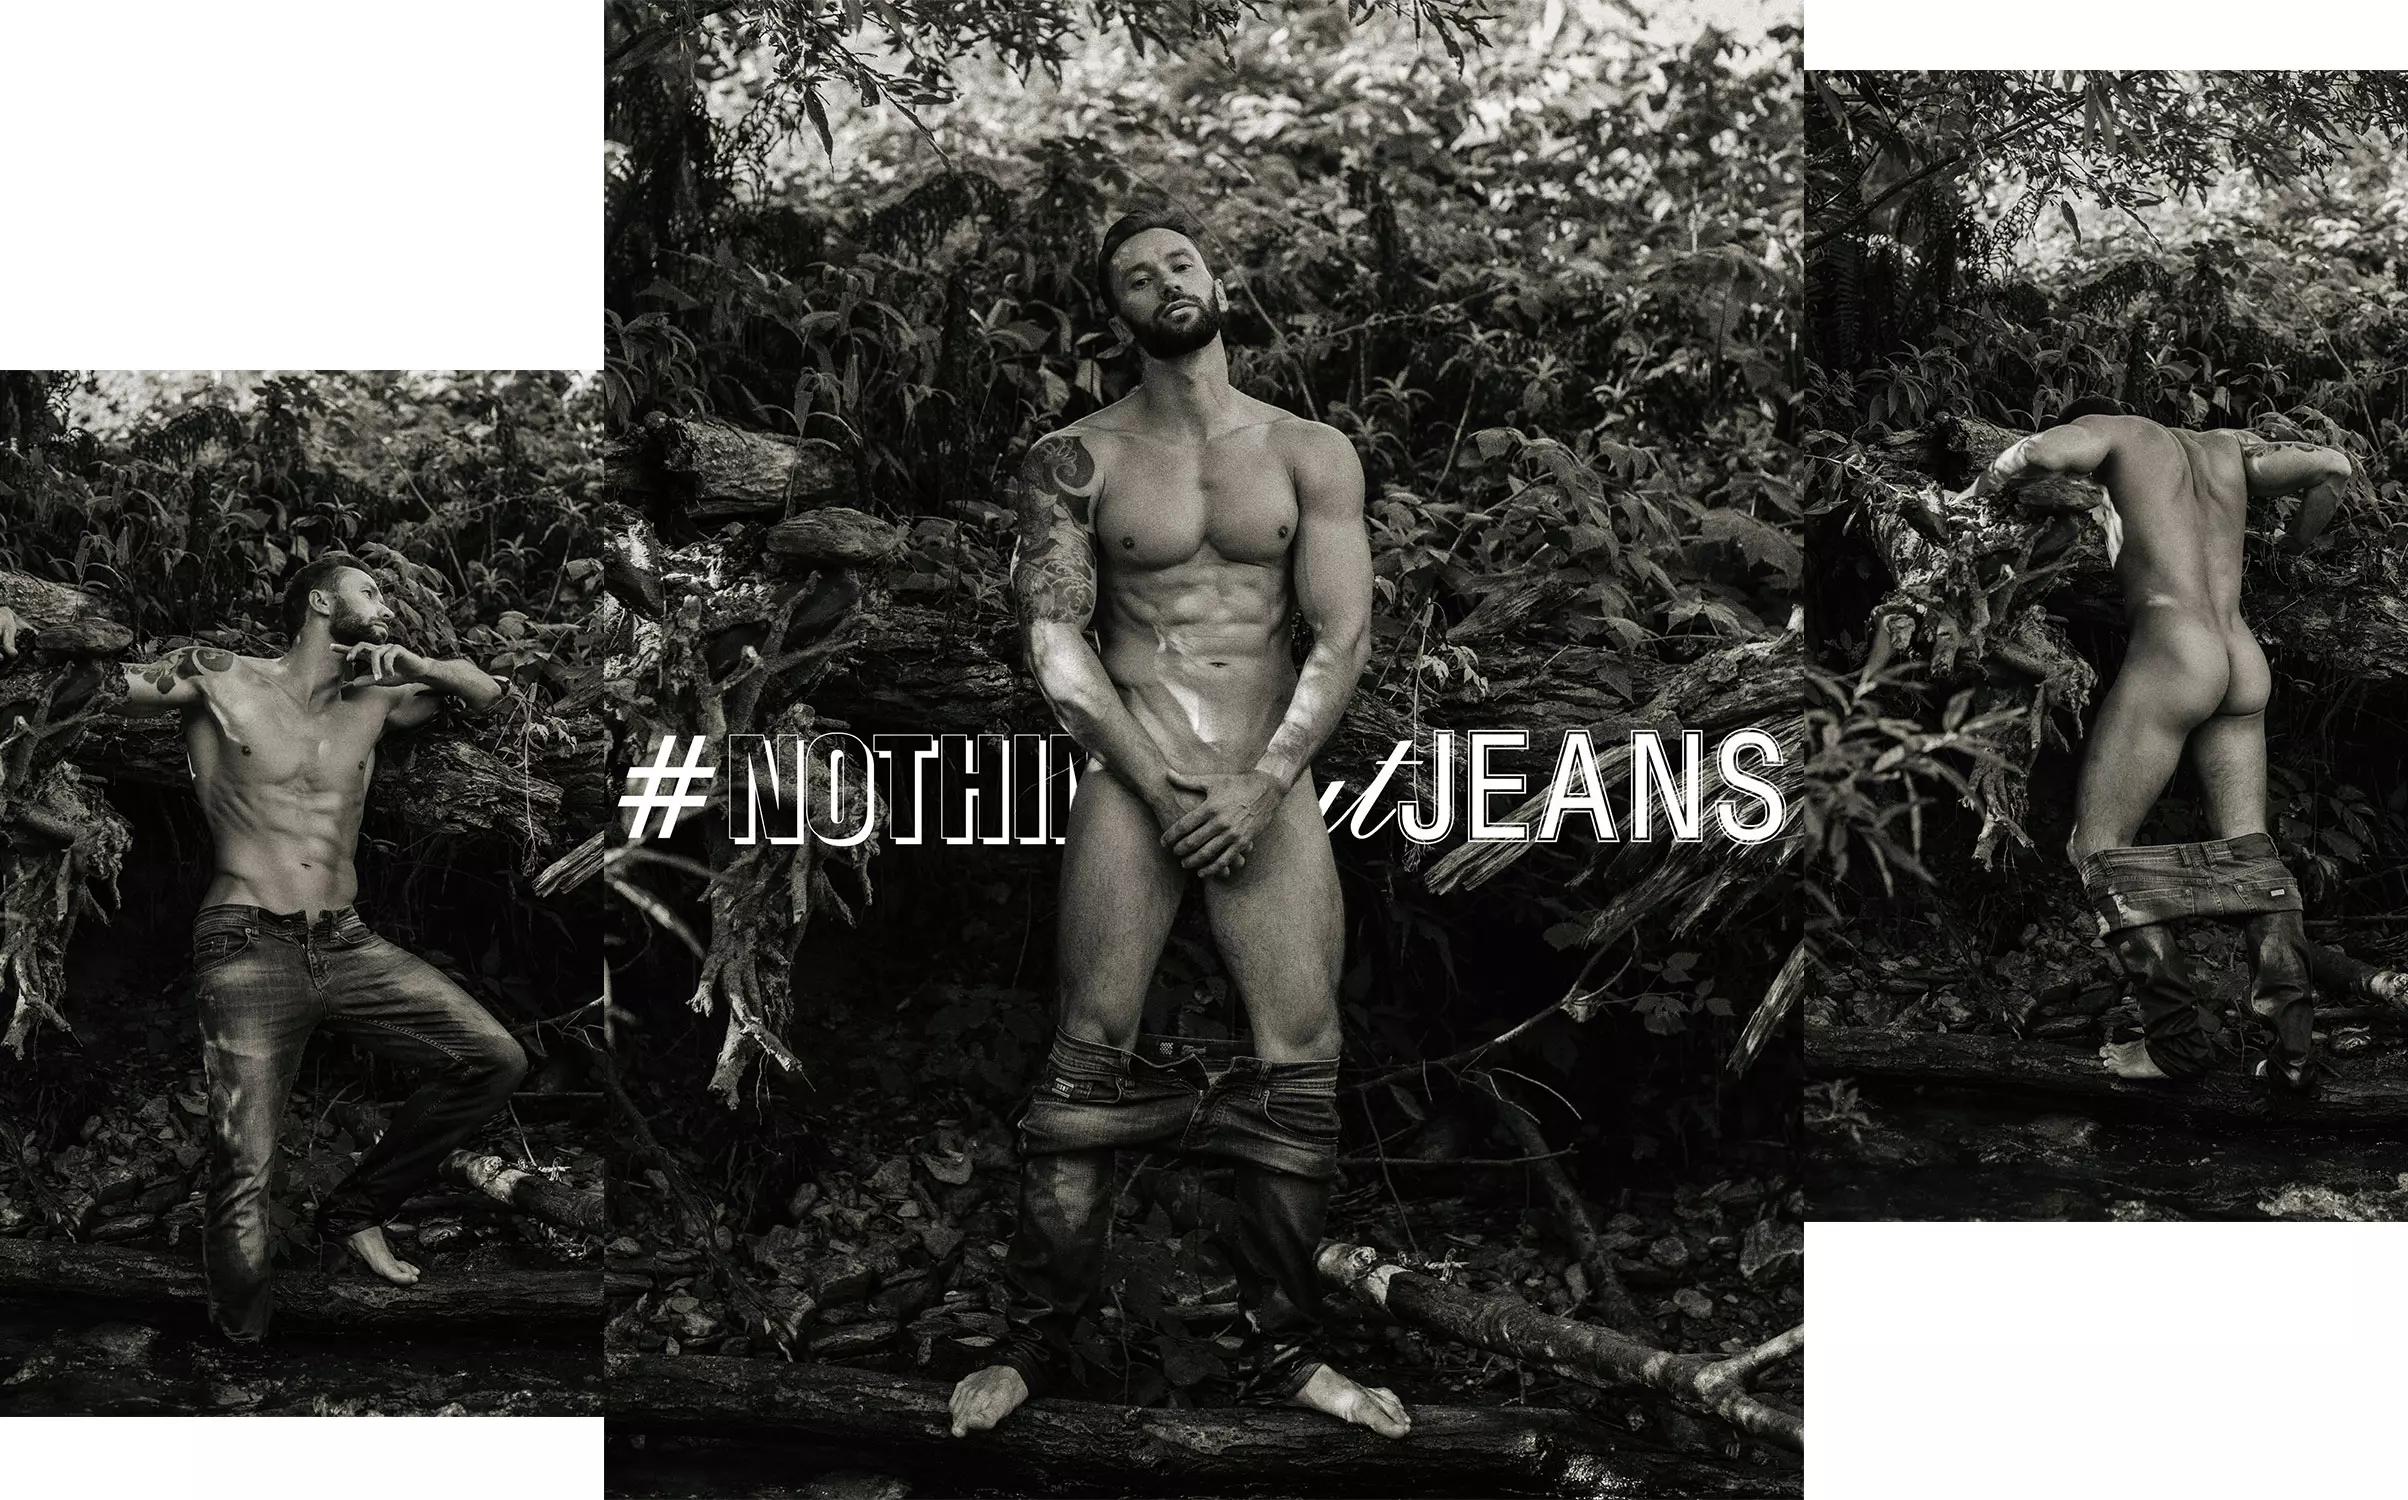 To Michaił Fomin w #NothingButJeans Serge'a Lee